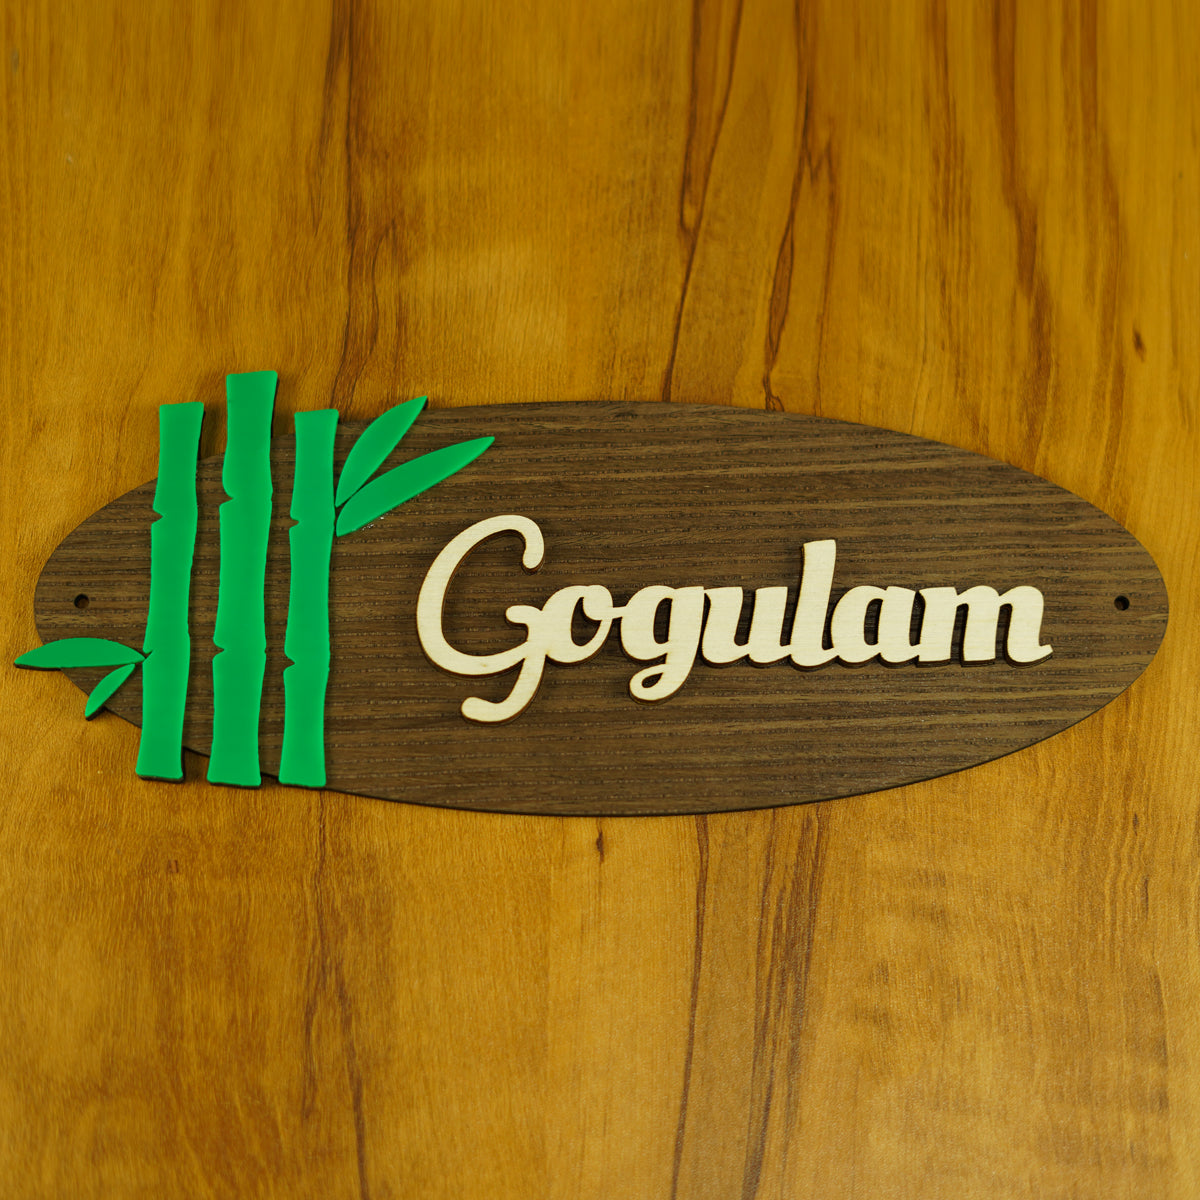 Bamboo Design Name Board with Veneer and Acrylic Wooden Touch - 13.5x5 Inches